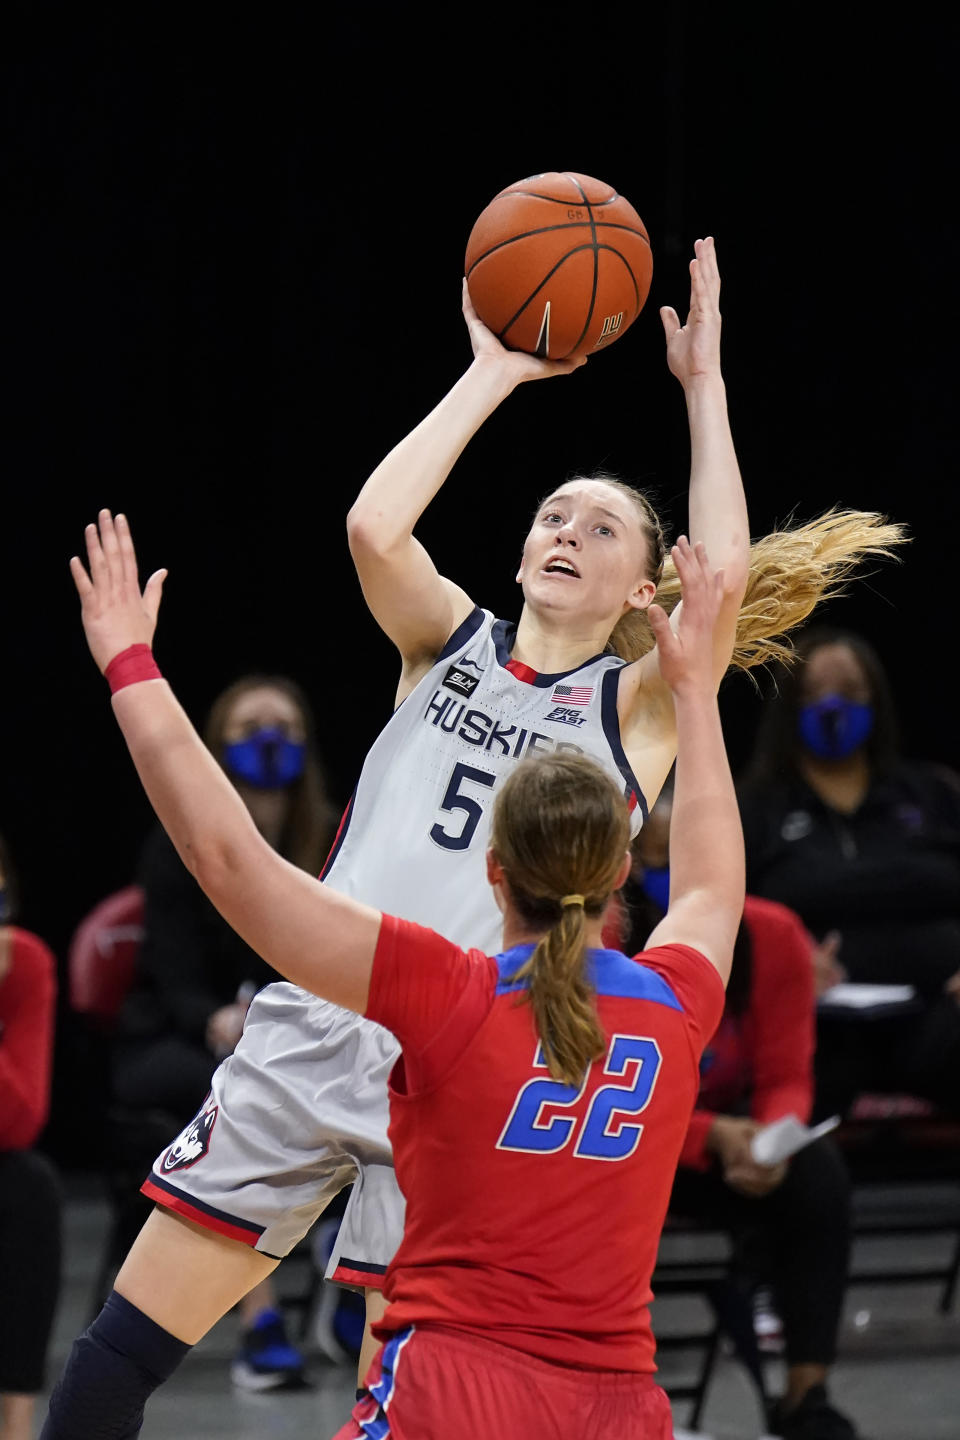 FILE - Connecticut's Paige Bueckers (5) shoots over DePaul's Jorie Allen during the first half of an NCAA college basketball game in Chicago, in this Sunday, Jan. 31, 2021, file photo. Bueckers has made The Associated Press All-America first team, announced Wednesday, March 17, 2021. (AP Photo/Charles Rex Arbogast, File)